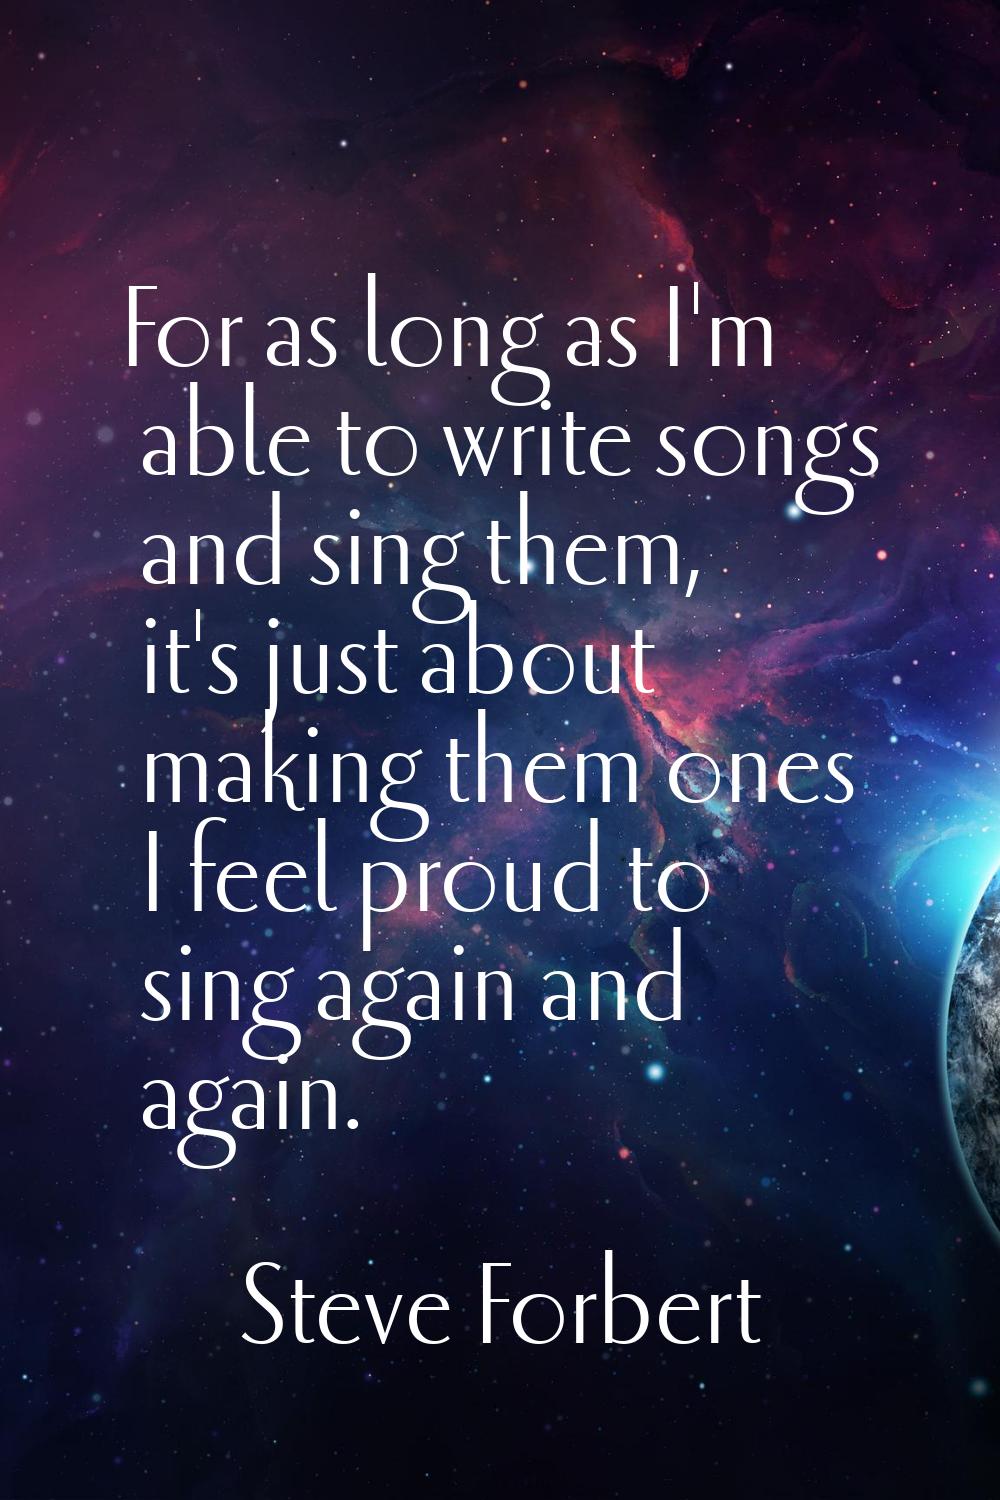 For as long as I'm able to write songs and sing them, it's just about making them ones I feel proud